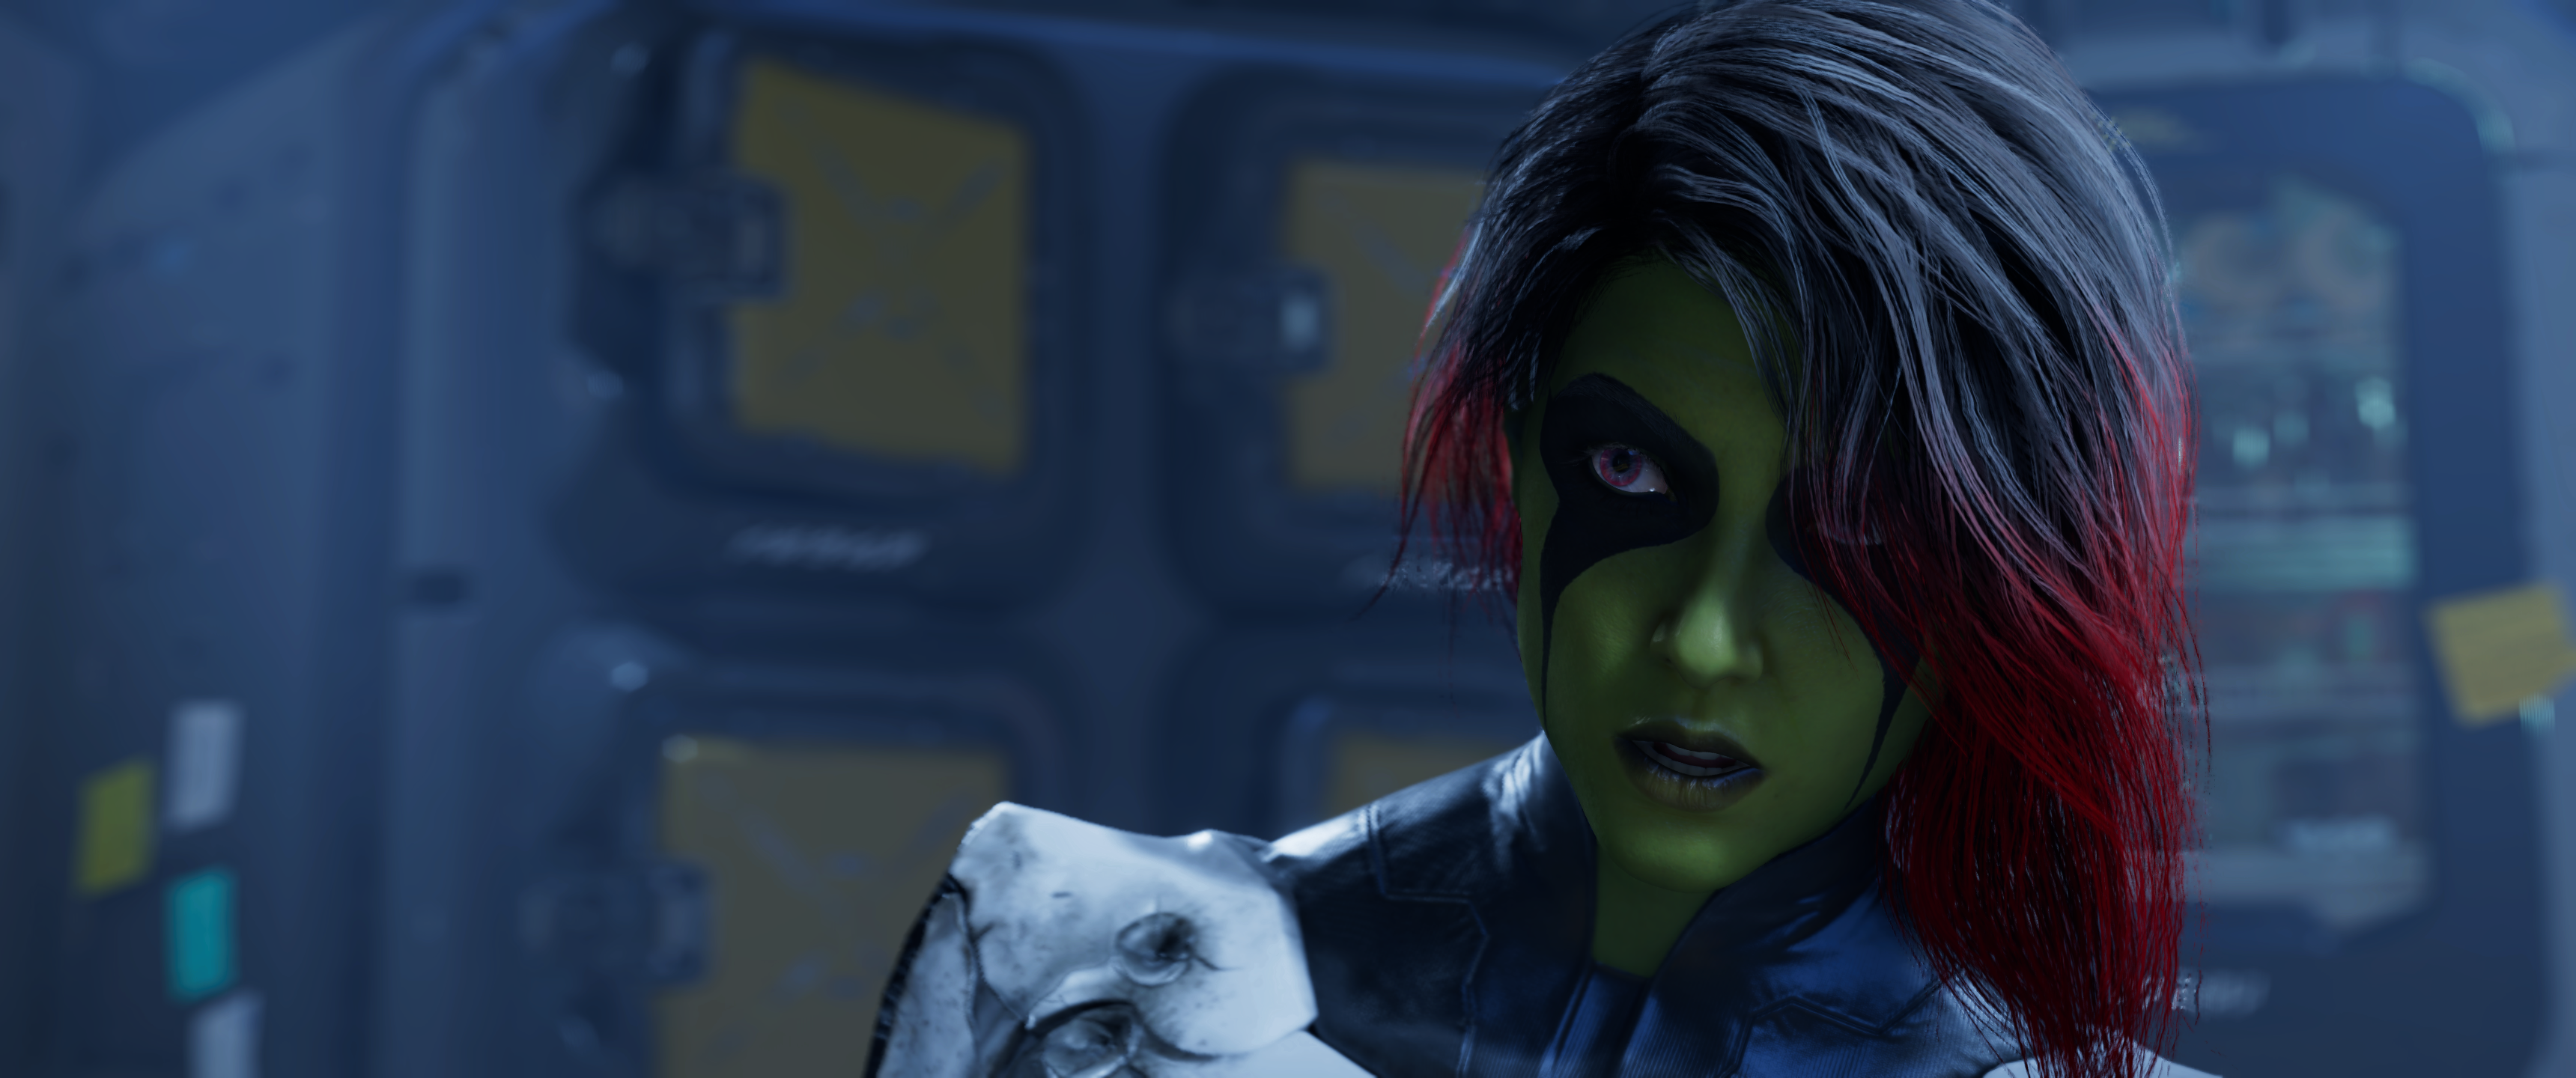 General 3440x1440 Guardians of the Galaxy (Game) video game characters Gamora  face paint